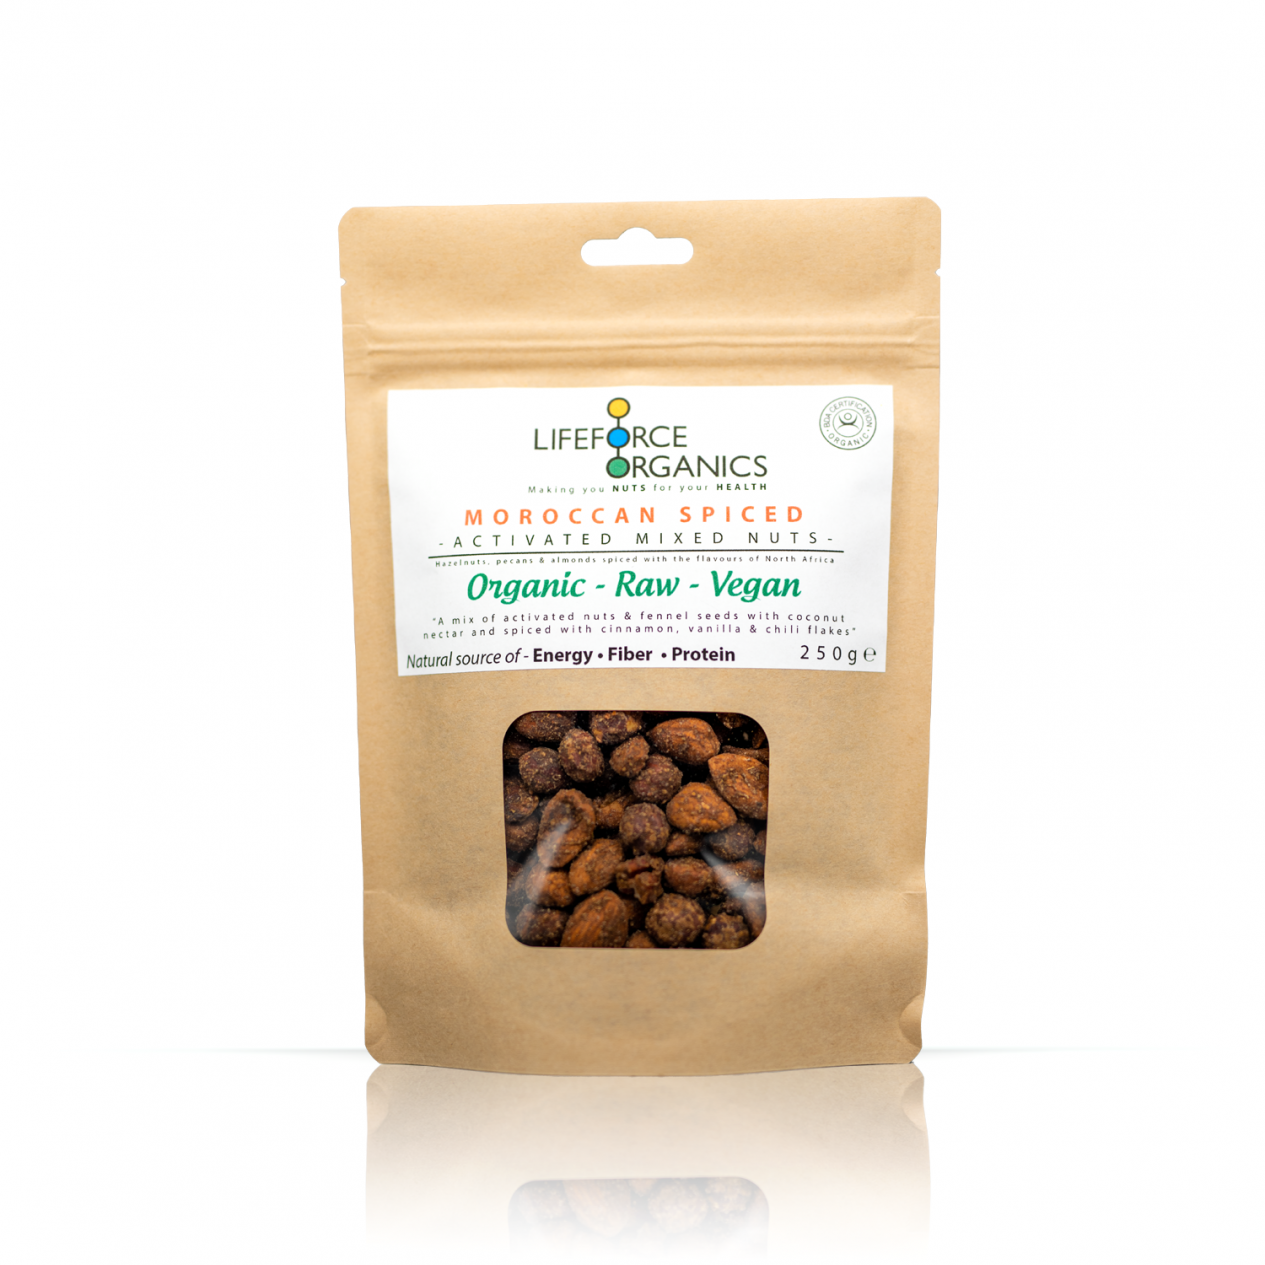 Lifeforce Organics Moroccan Spiced Activated Mixed Nuts (Organic), Nuts & Seeds